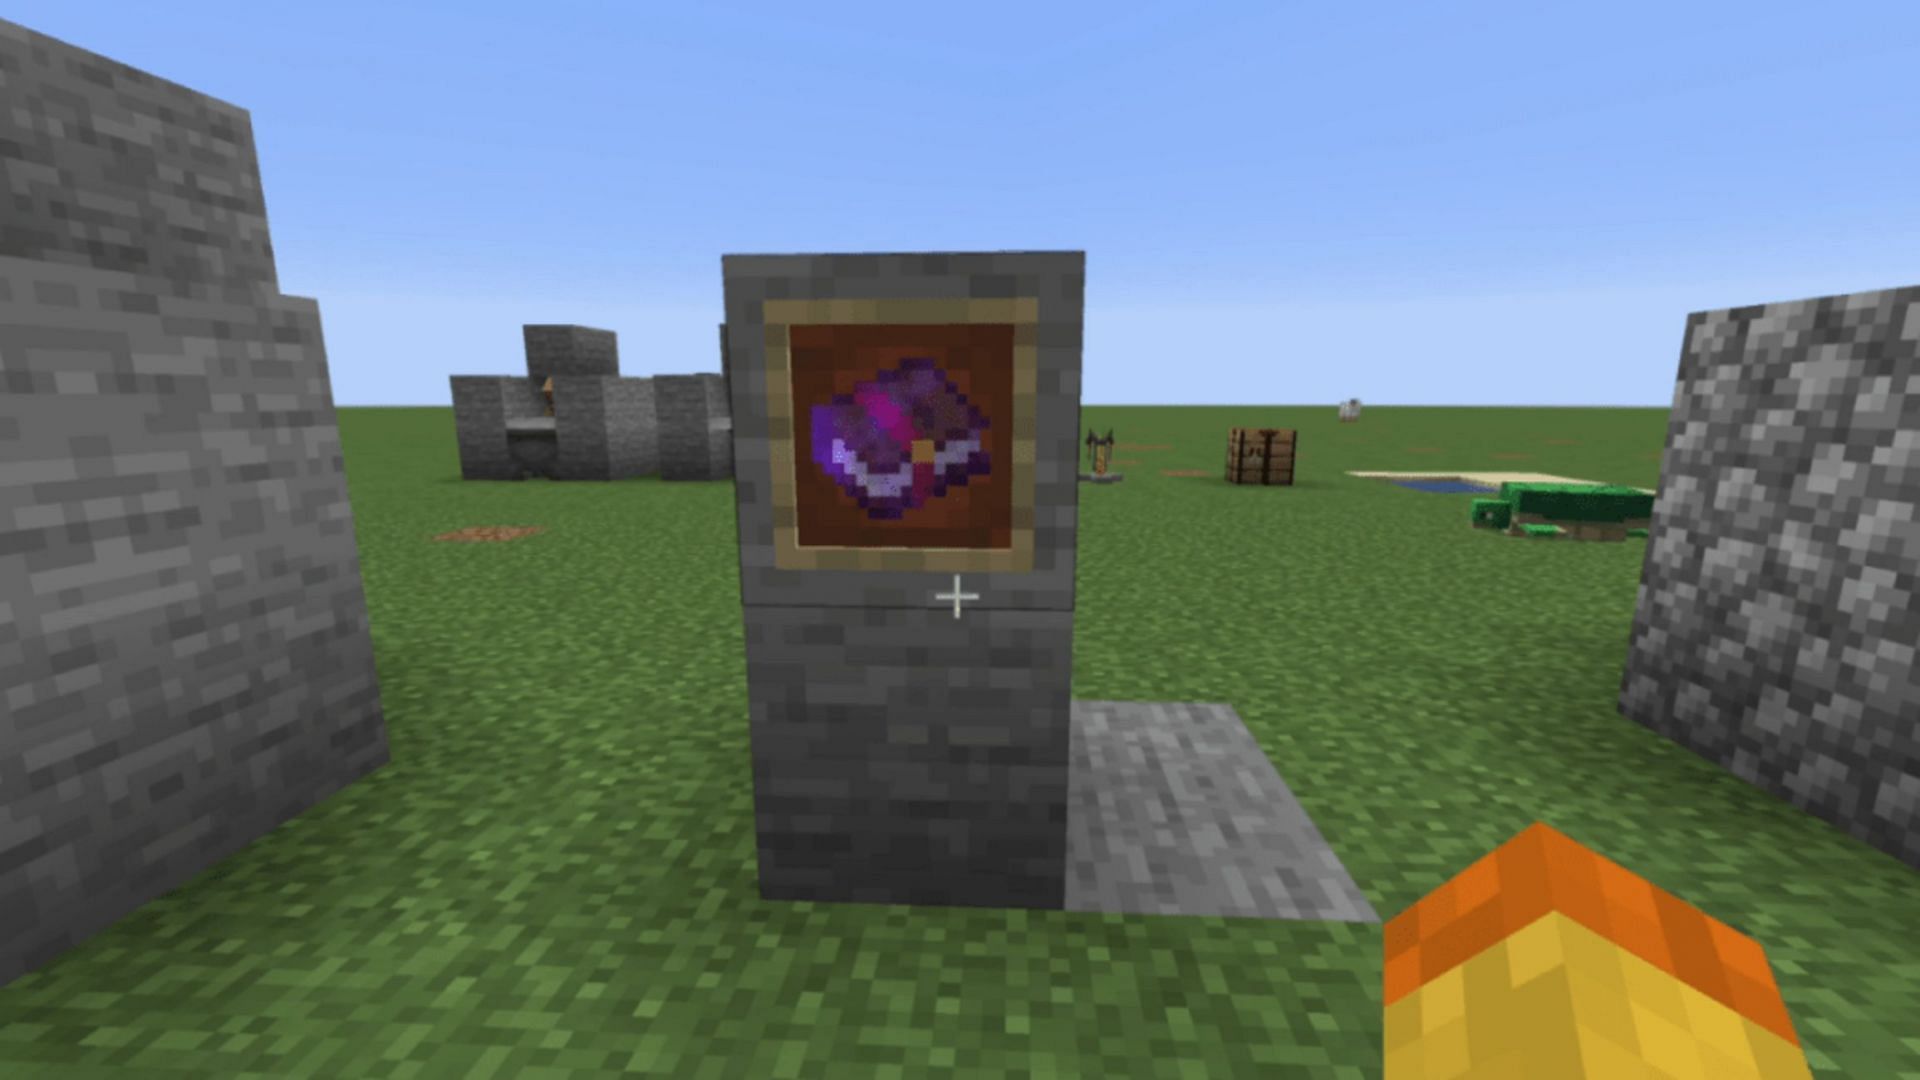 Curse of Vanishing is one of two curse enchantments that bestow negative effects (Image via Mojang)